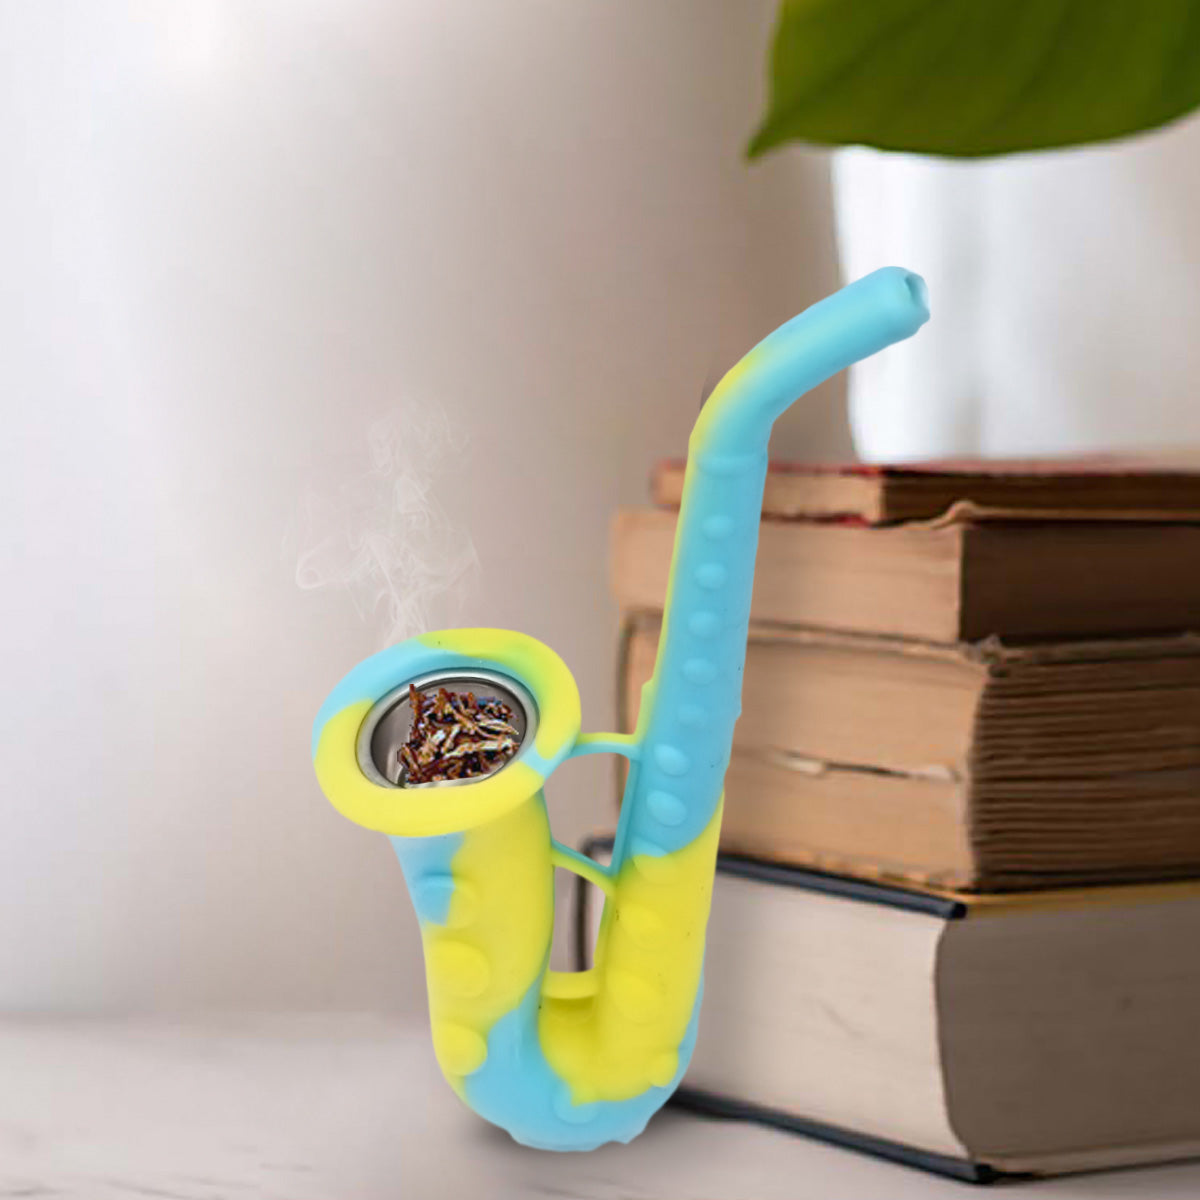 Kookee Silicone Unbreakable Saxophone Smoking Pipe, Tobacco Pipes with Steel Bowl, Blue and Yellow